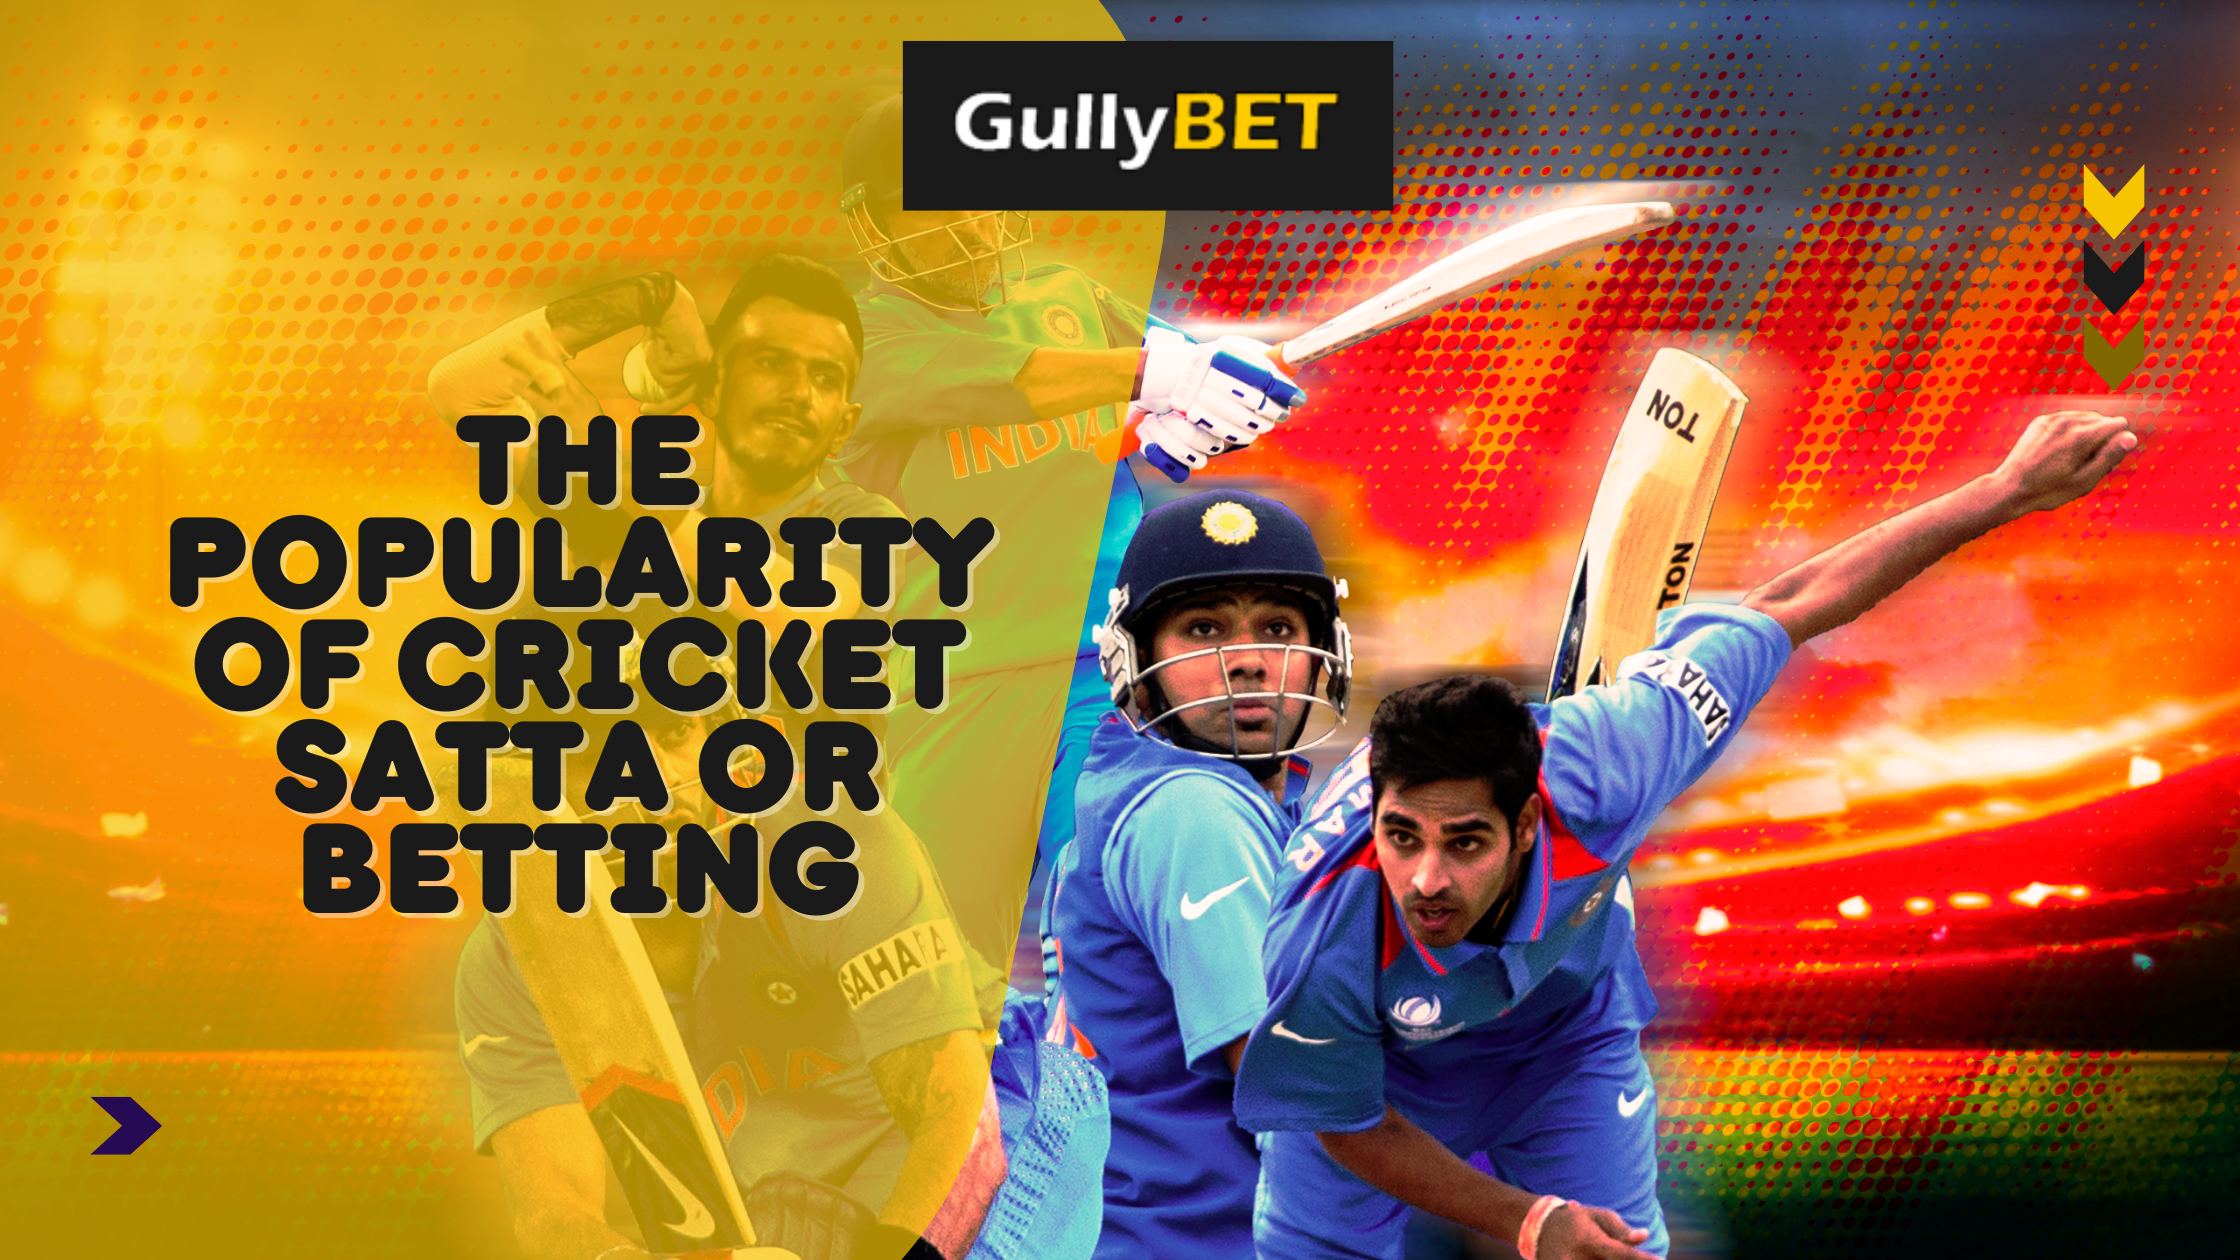 GullyBET Idea Behind the Popularity of Cricket Satta or Online Betting